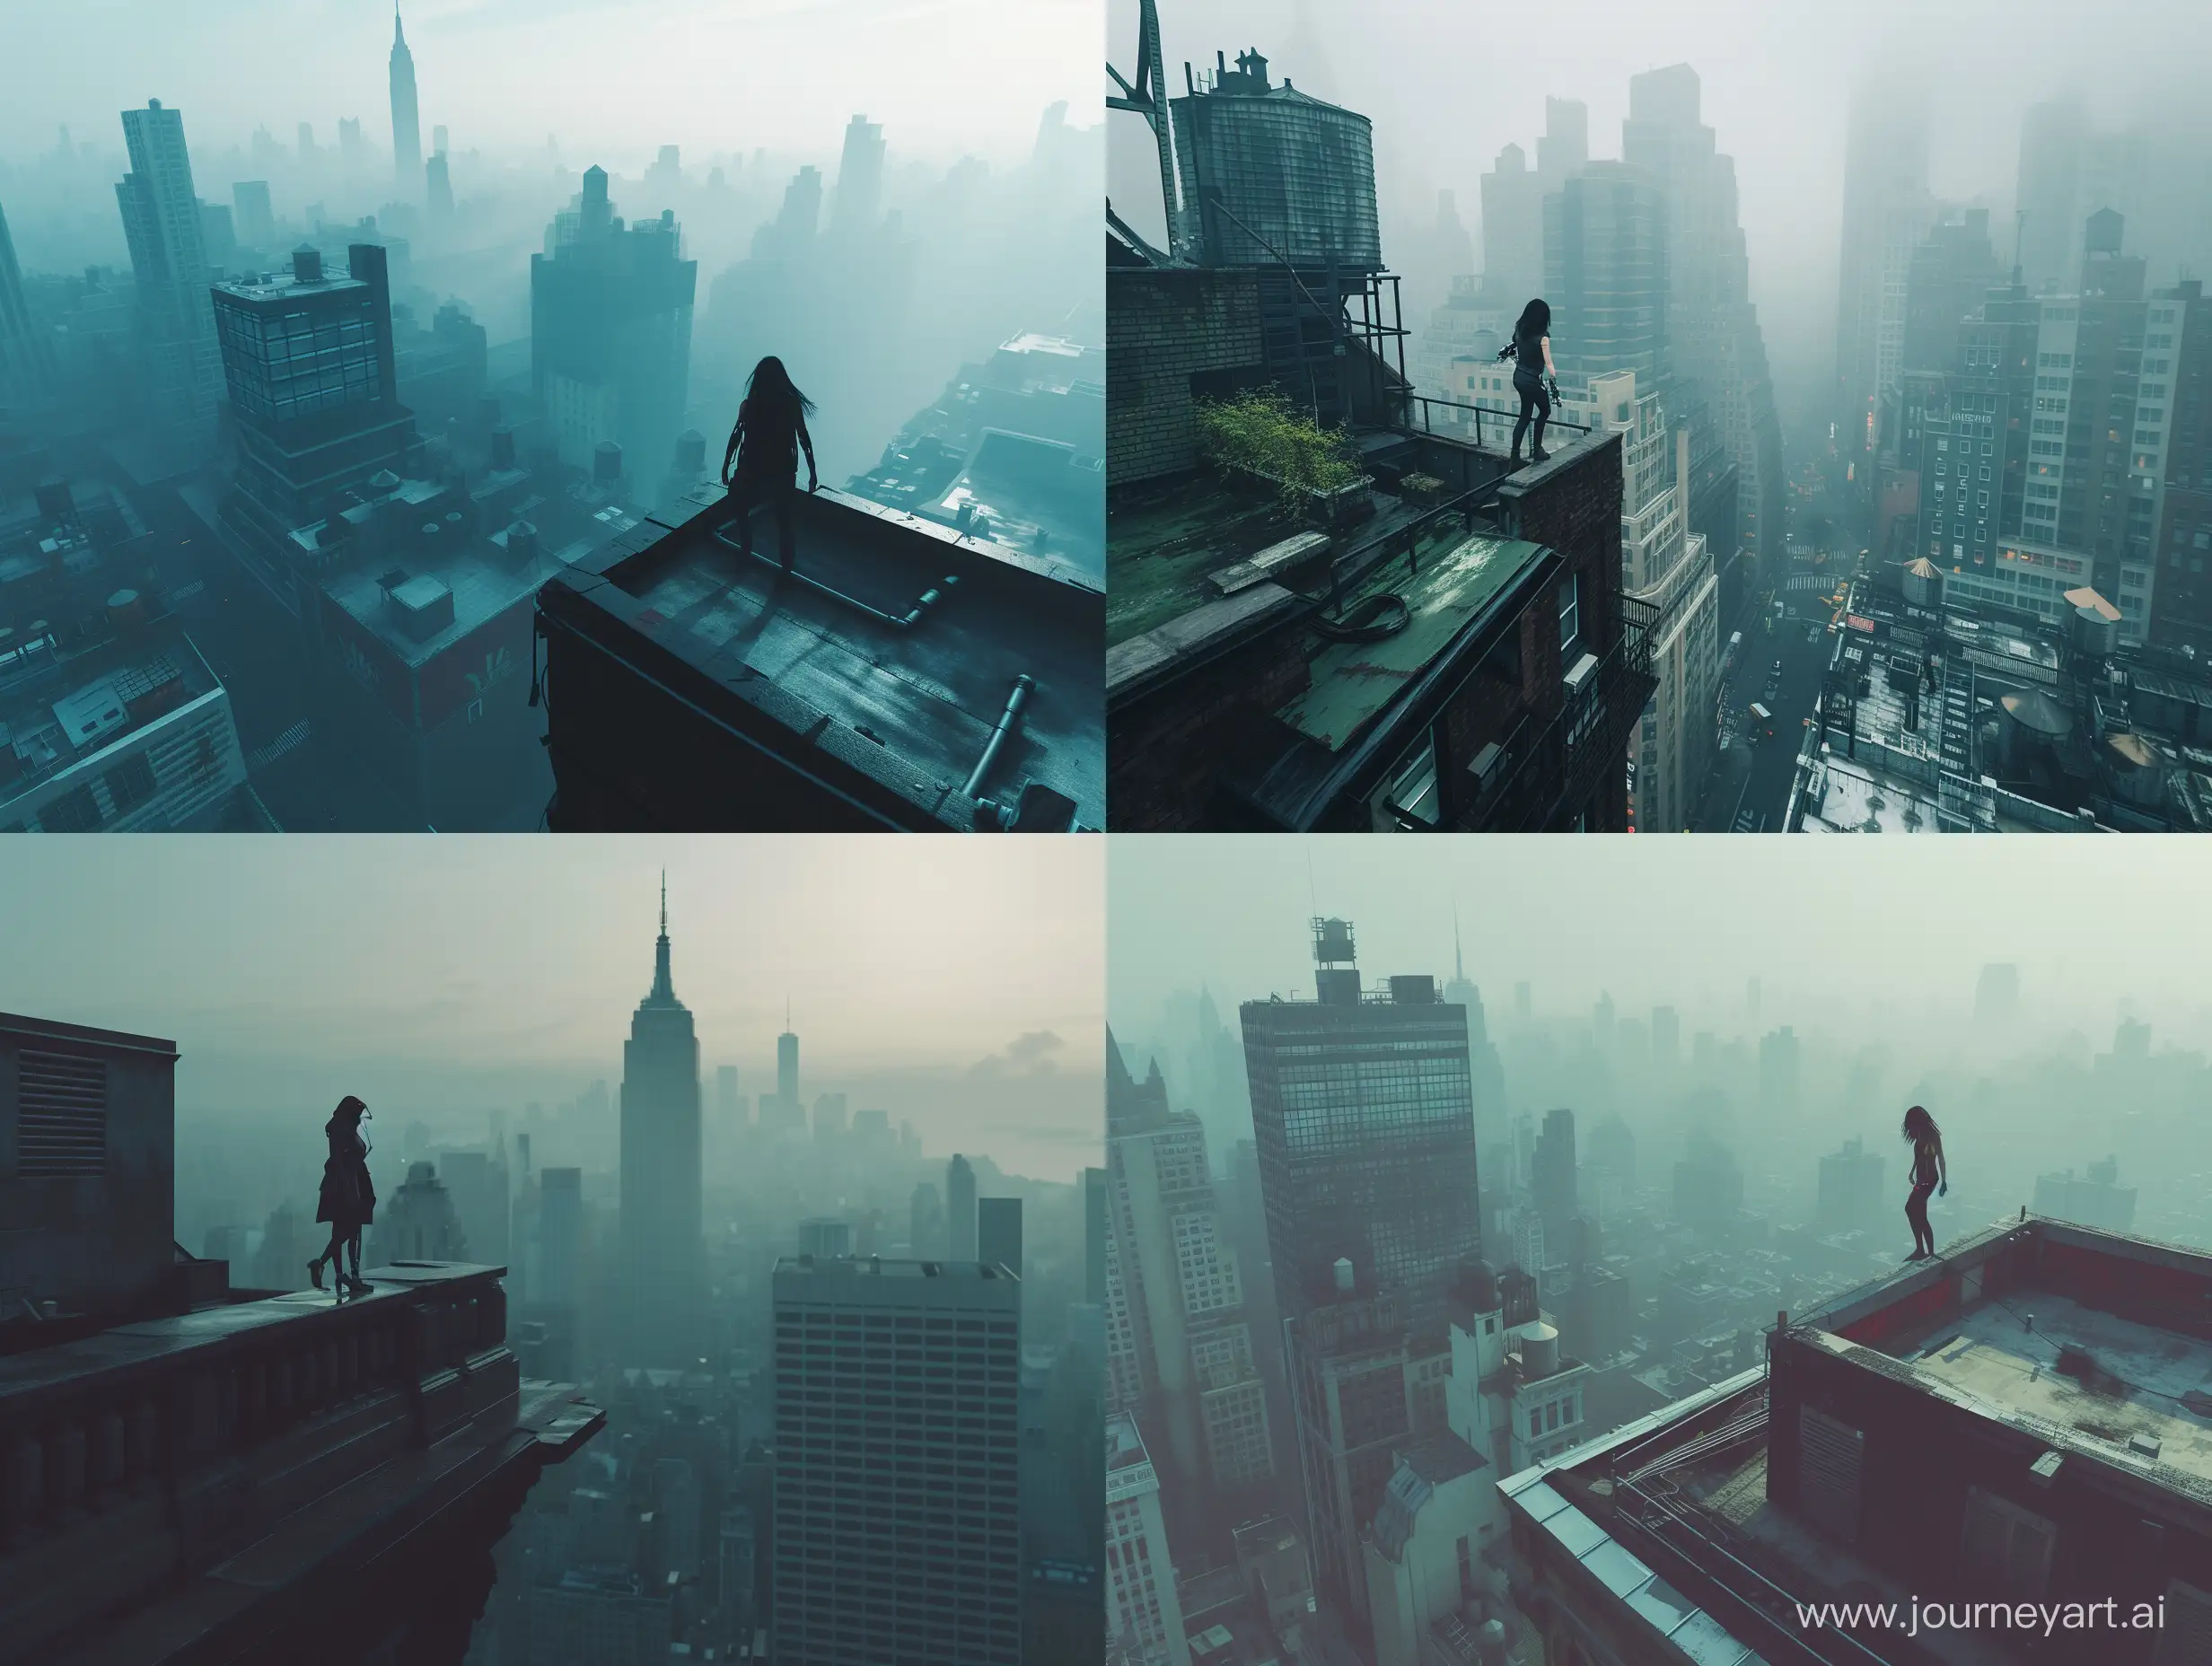 a bustling Procedural new new york city, the photo is bathed in natural lighting, relaxing setting. Shot in 4k with a high end DSLR camera. such as a Canon EOS R5 with a 50mm f/1. 2 lens, architecture, drone view, skyline, a woman is standing on the edge of a rooftop, vivid, foggy, dystopian, science fiction, she has a bionic arm, wide view, skyline,
